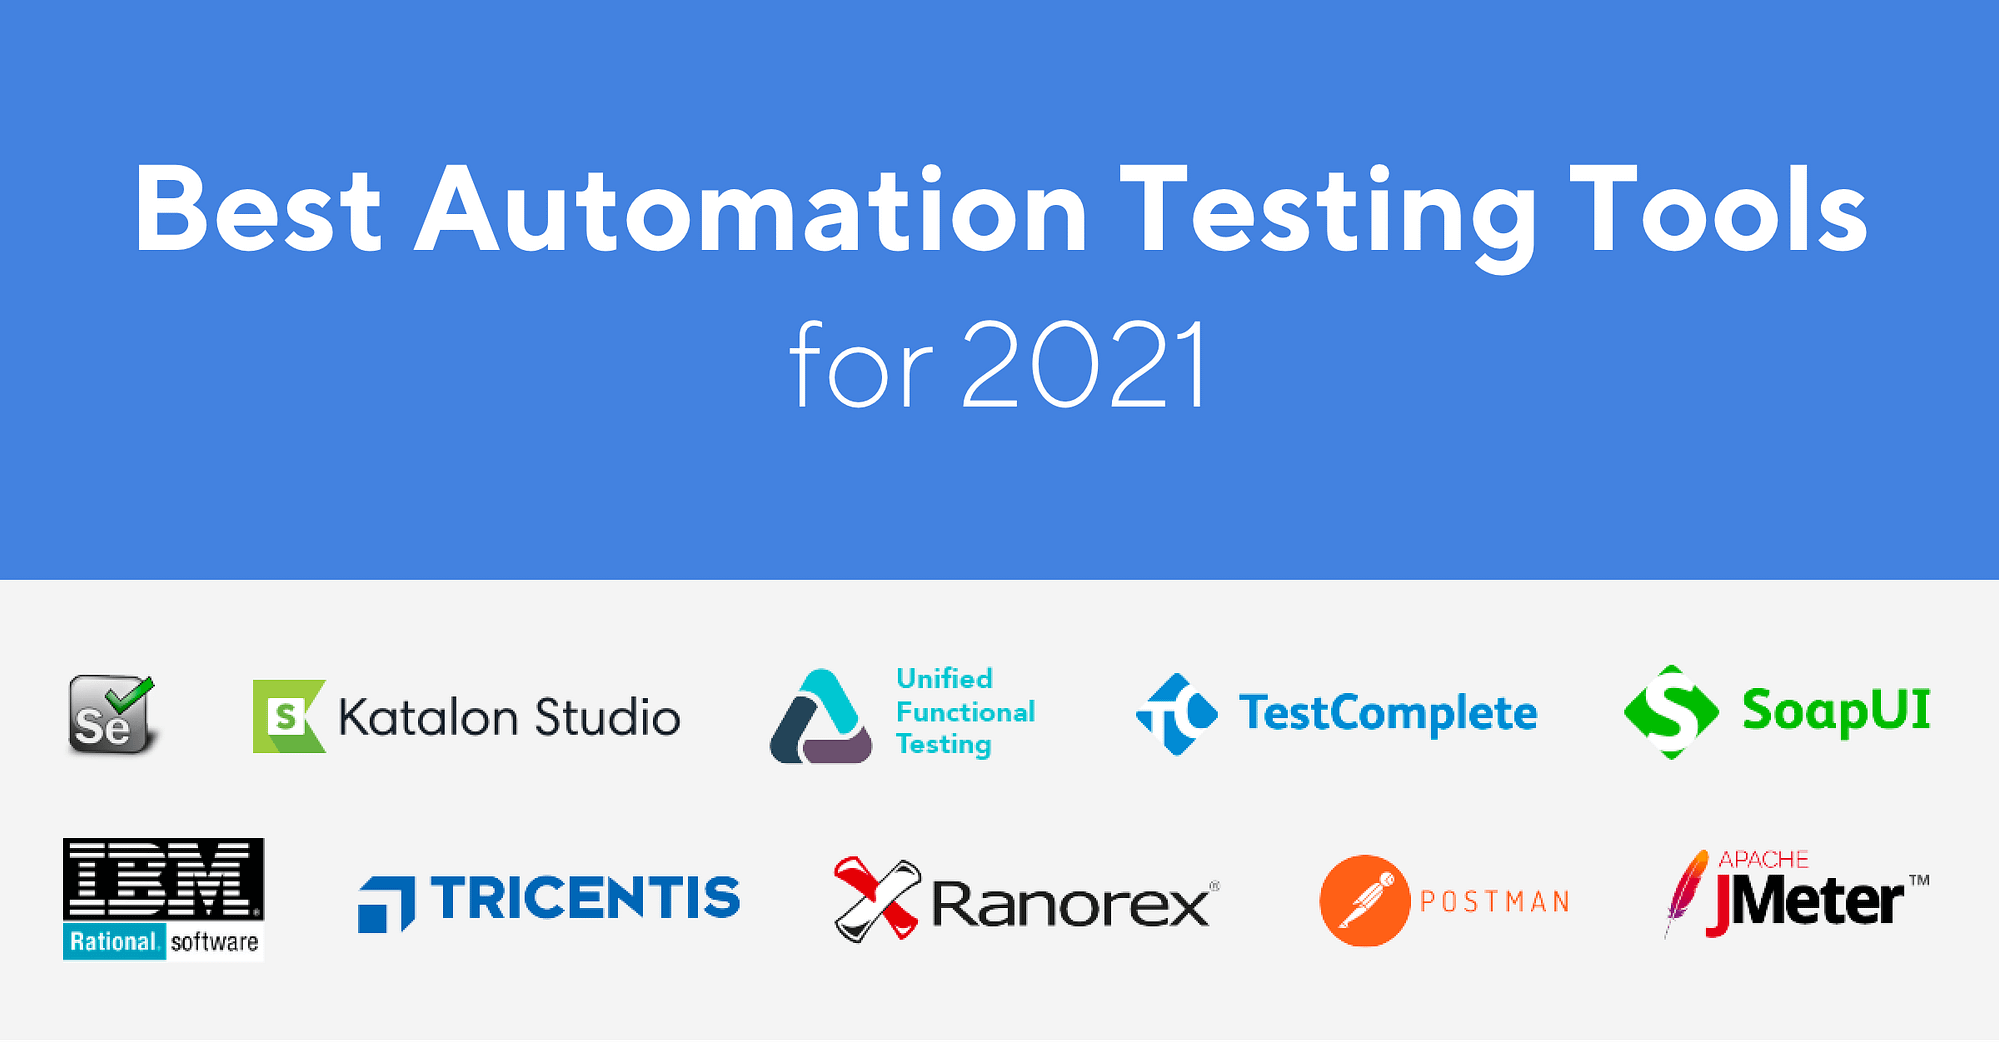 5 Best Automation Testing Trends in 2021